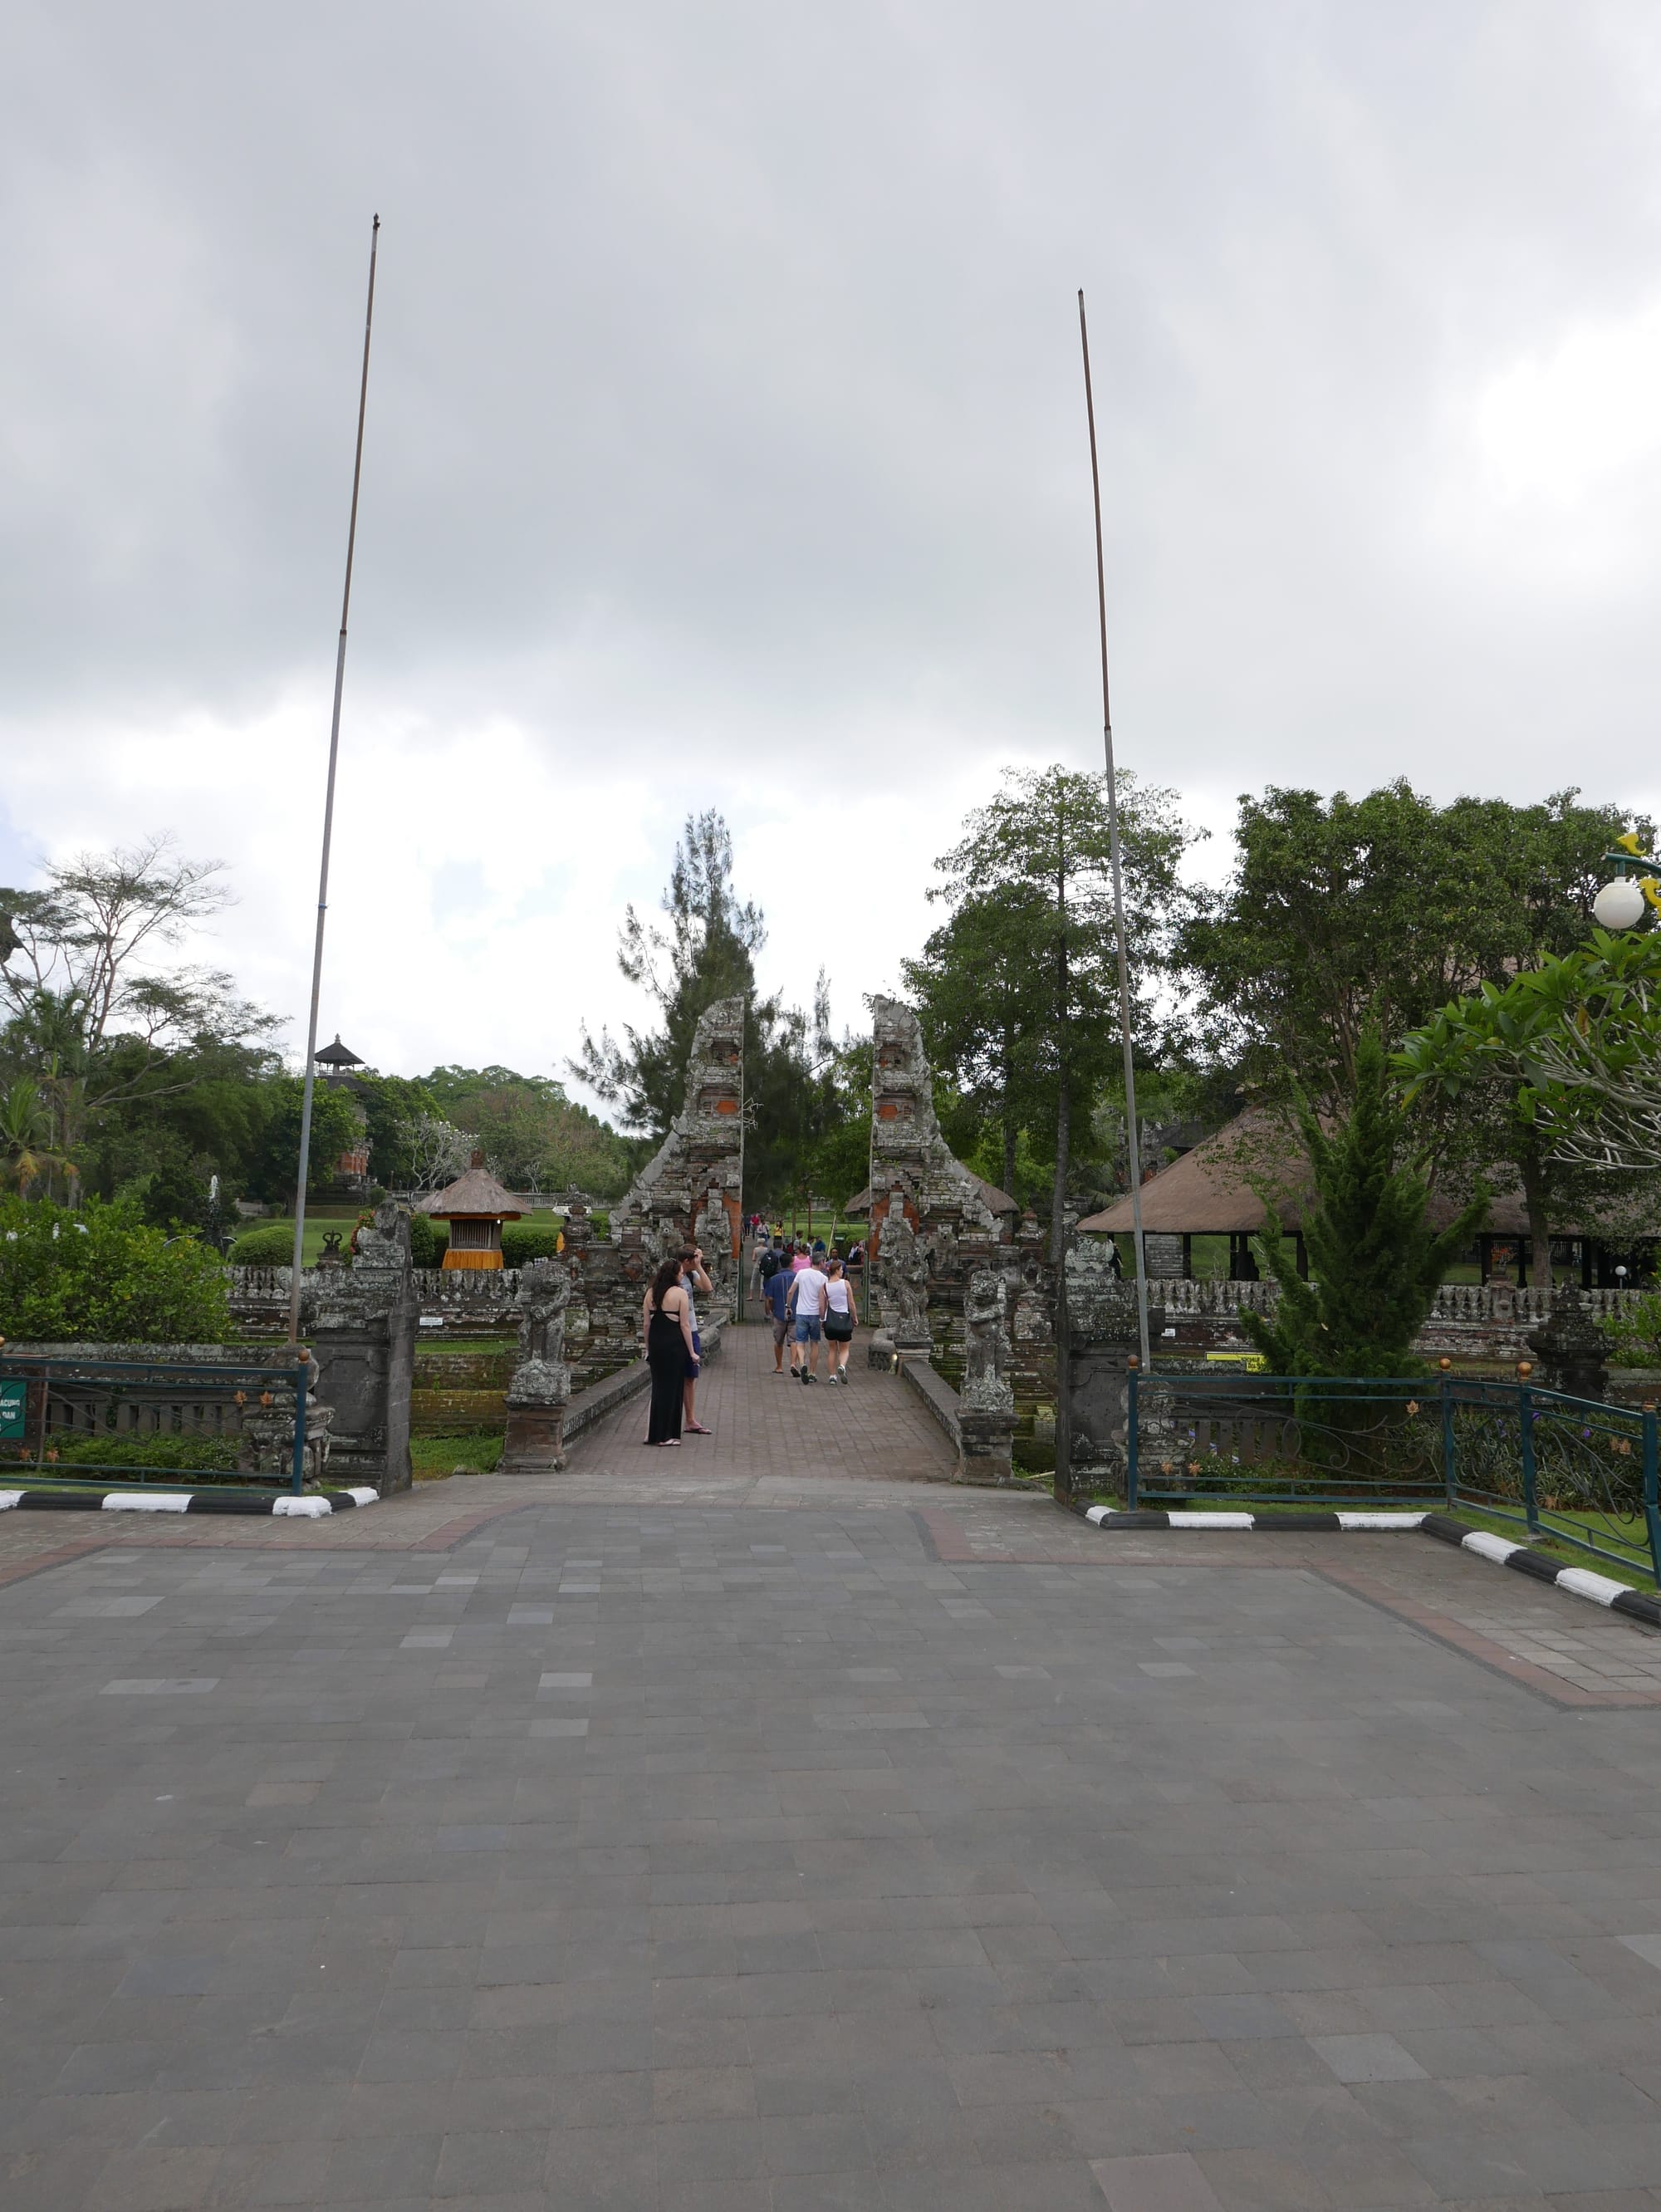 Photo by Author — the approach to Pura Taman Ayun, Bali, Indonesia — a Royal Water Temple